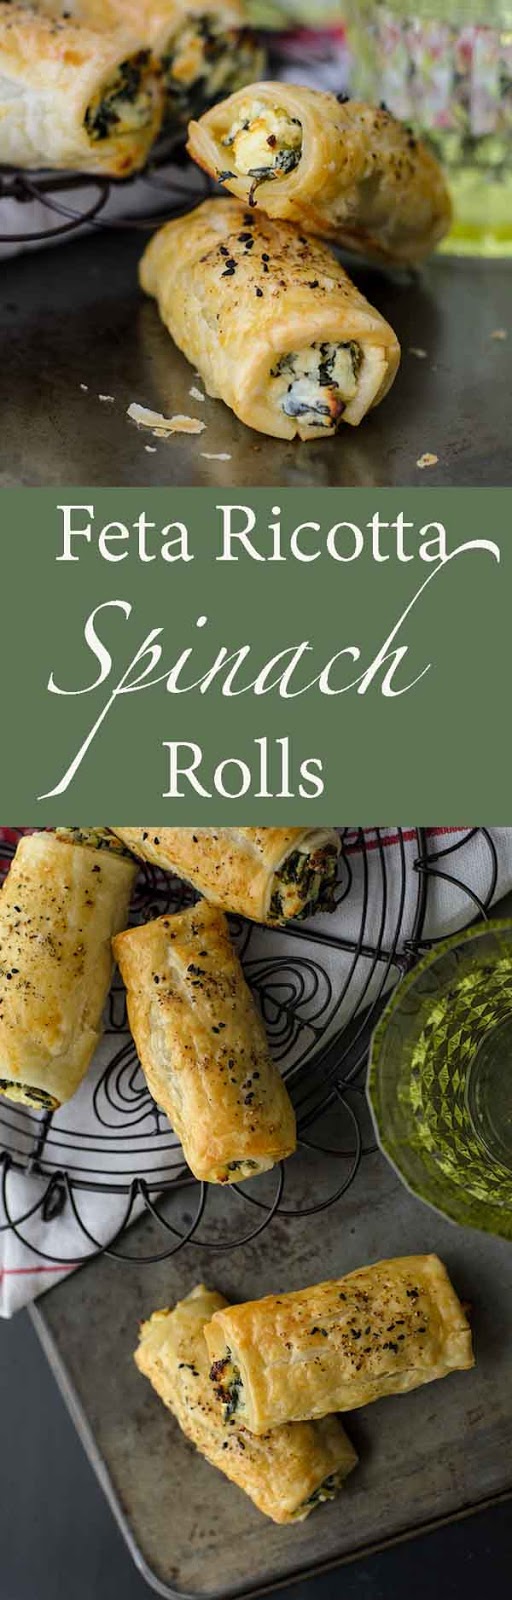 Easy to bake Feta Ricotta Spinach Rolls. Its a hearty vegetarian meal.